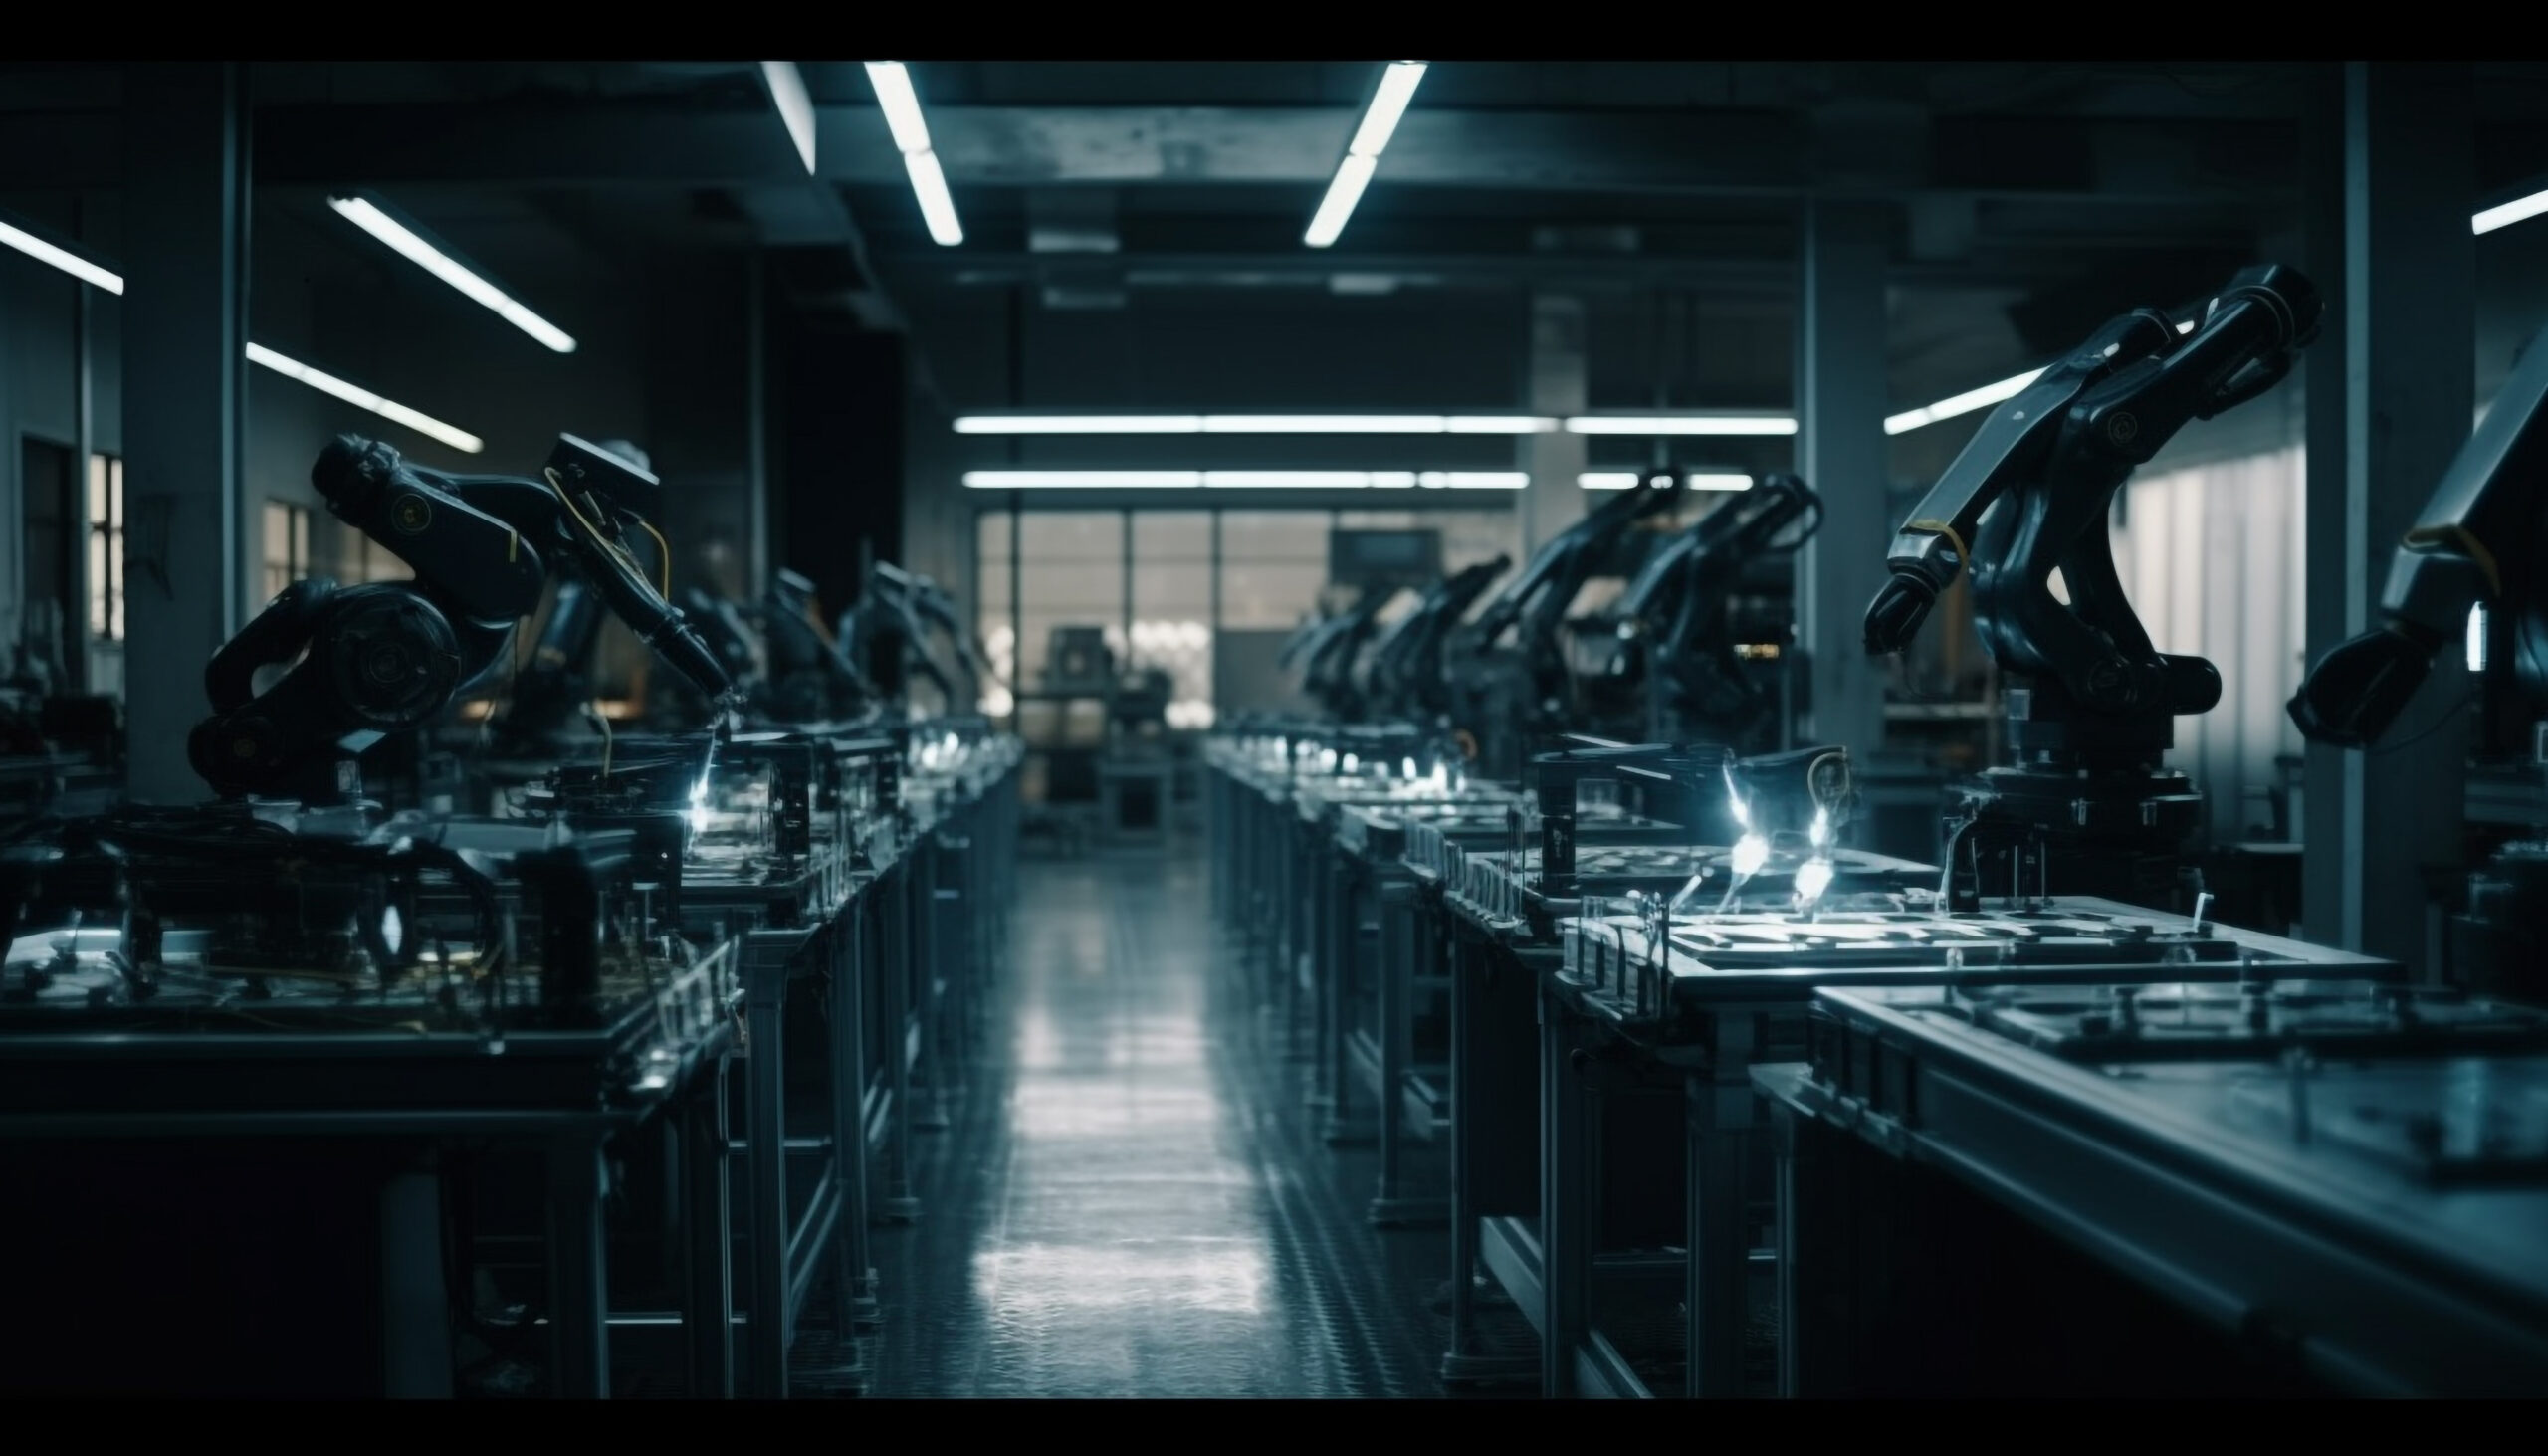 Modern machinery in a futuristic laboratory setting generated by artificial intelligence